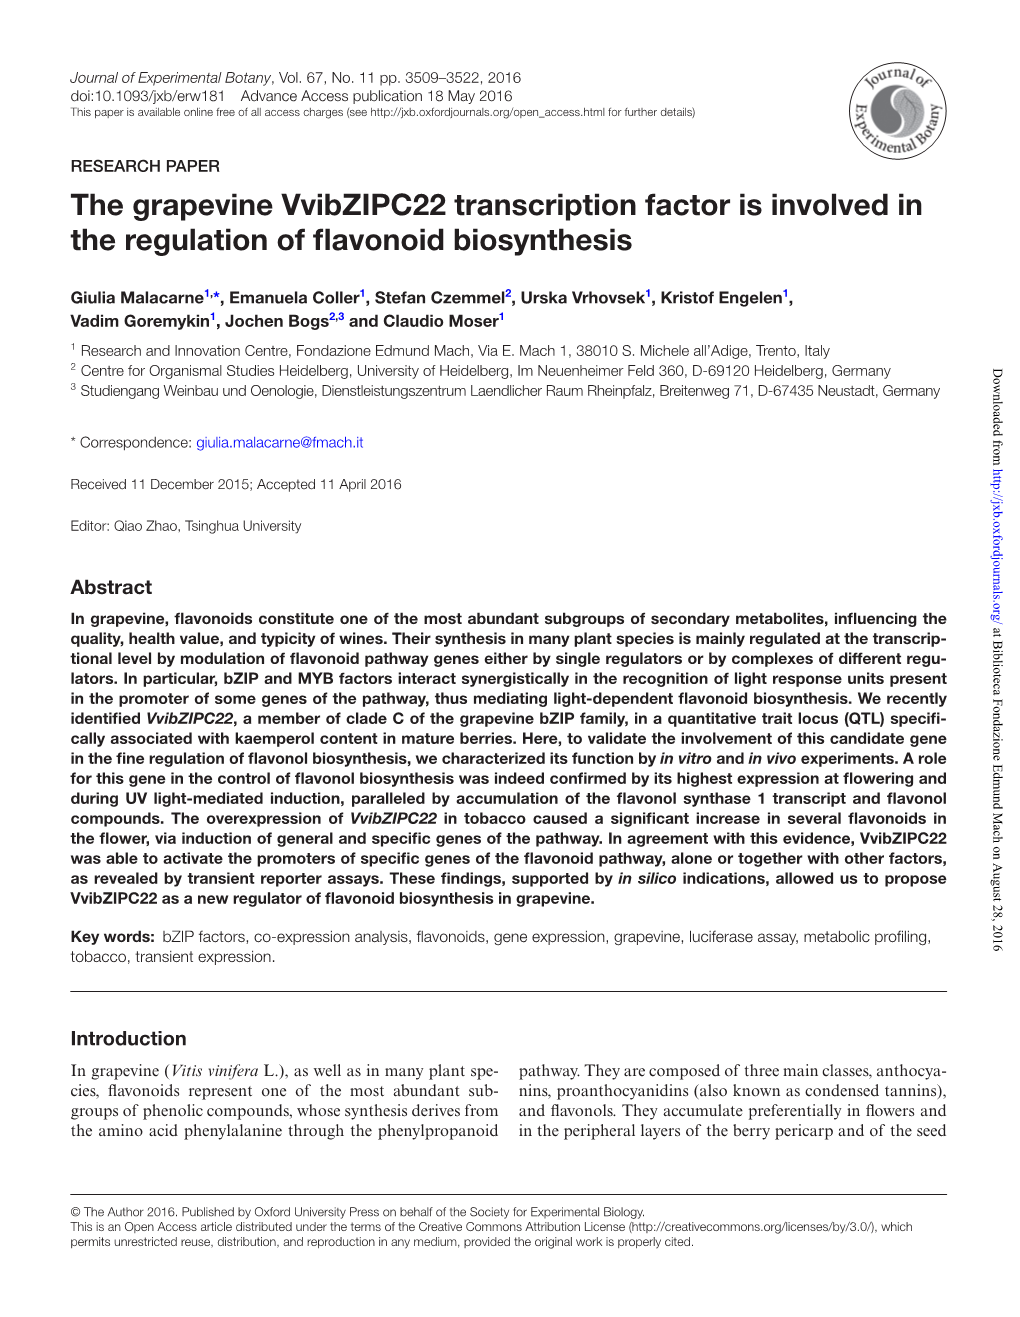 The Grapevine Vvibzipc22 Transcription Factor Is Involved in the Regulation of Flavonoid Biosynthesis